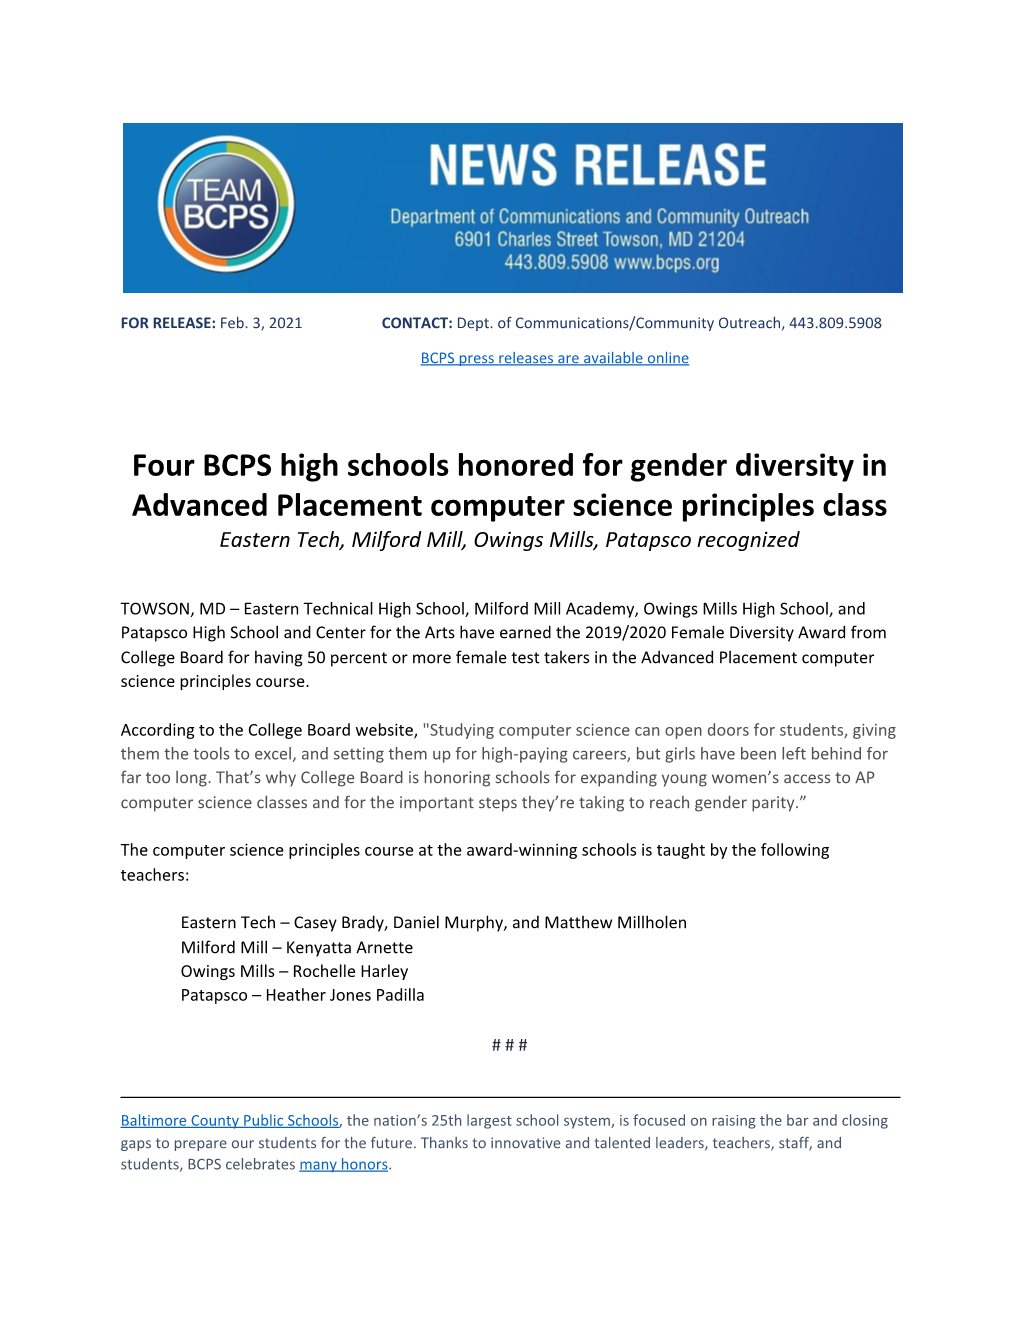 Four BCPS High Schools Honored for Gender Diversity in Advanced